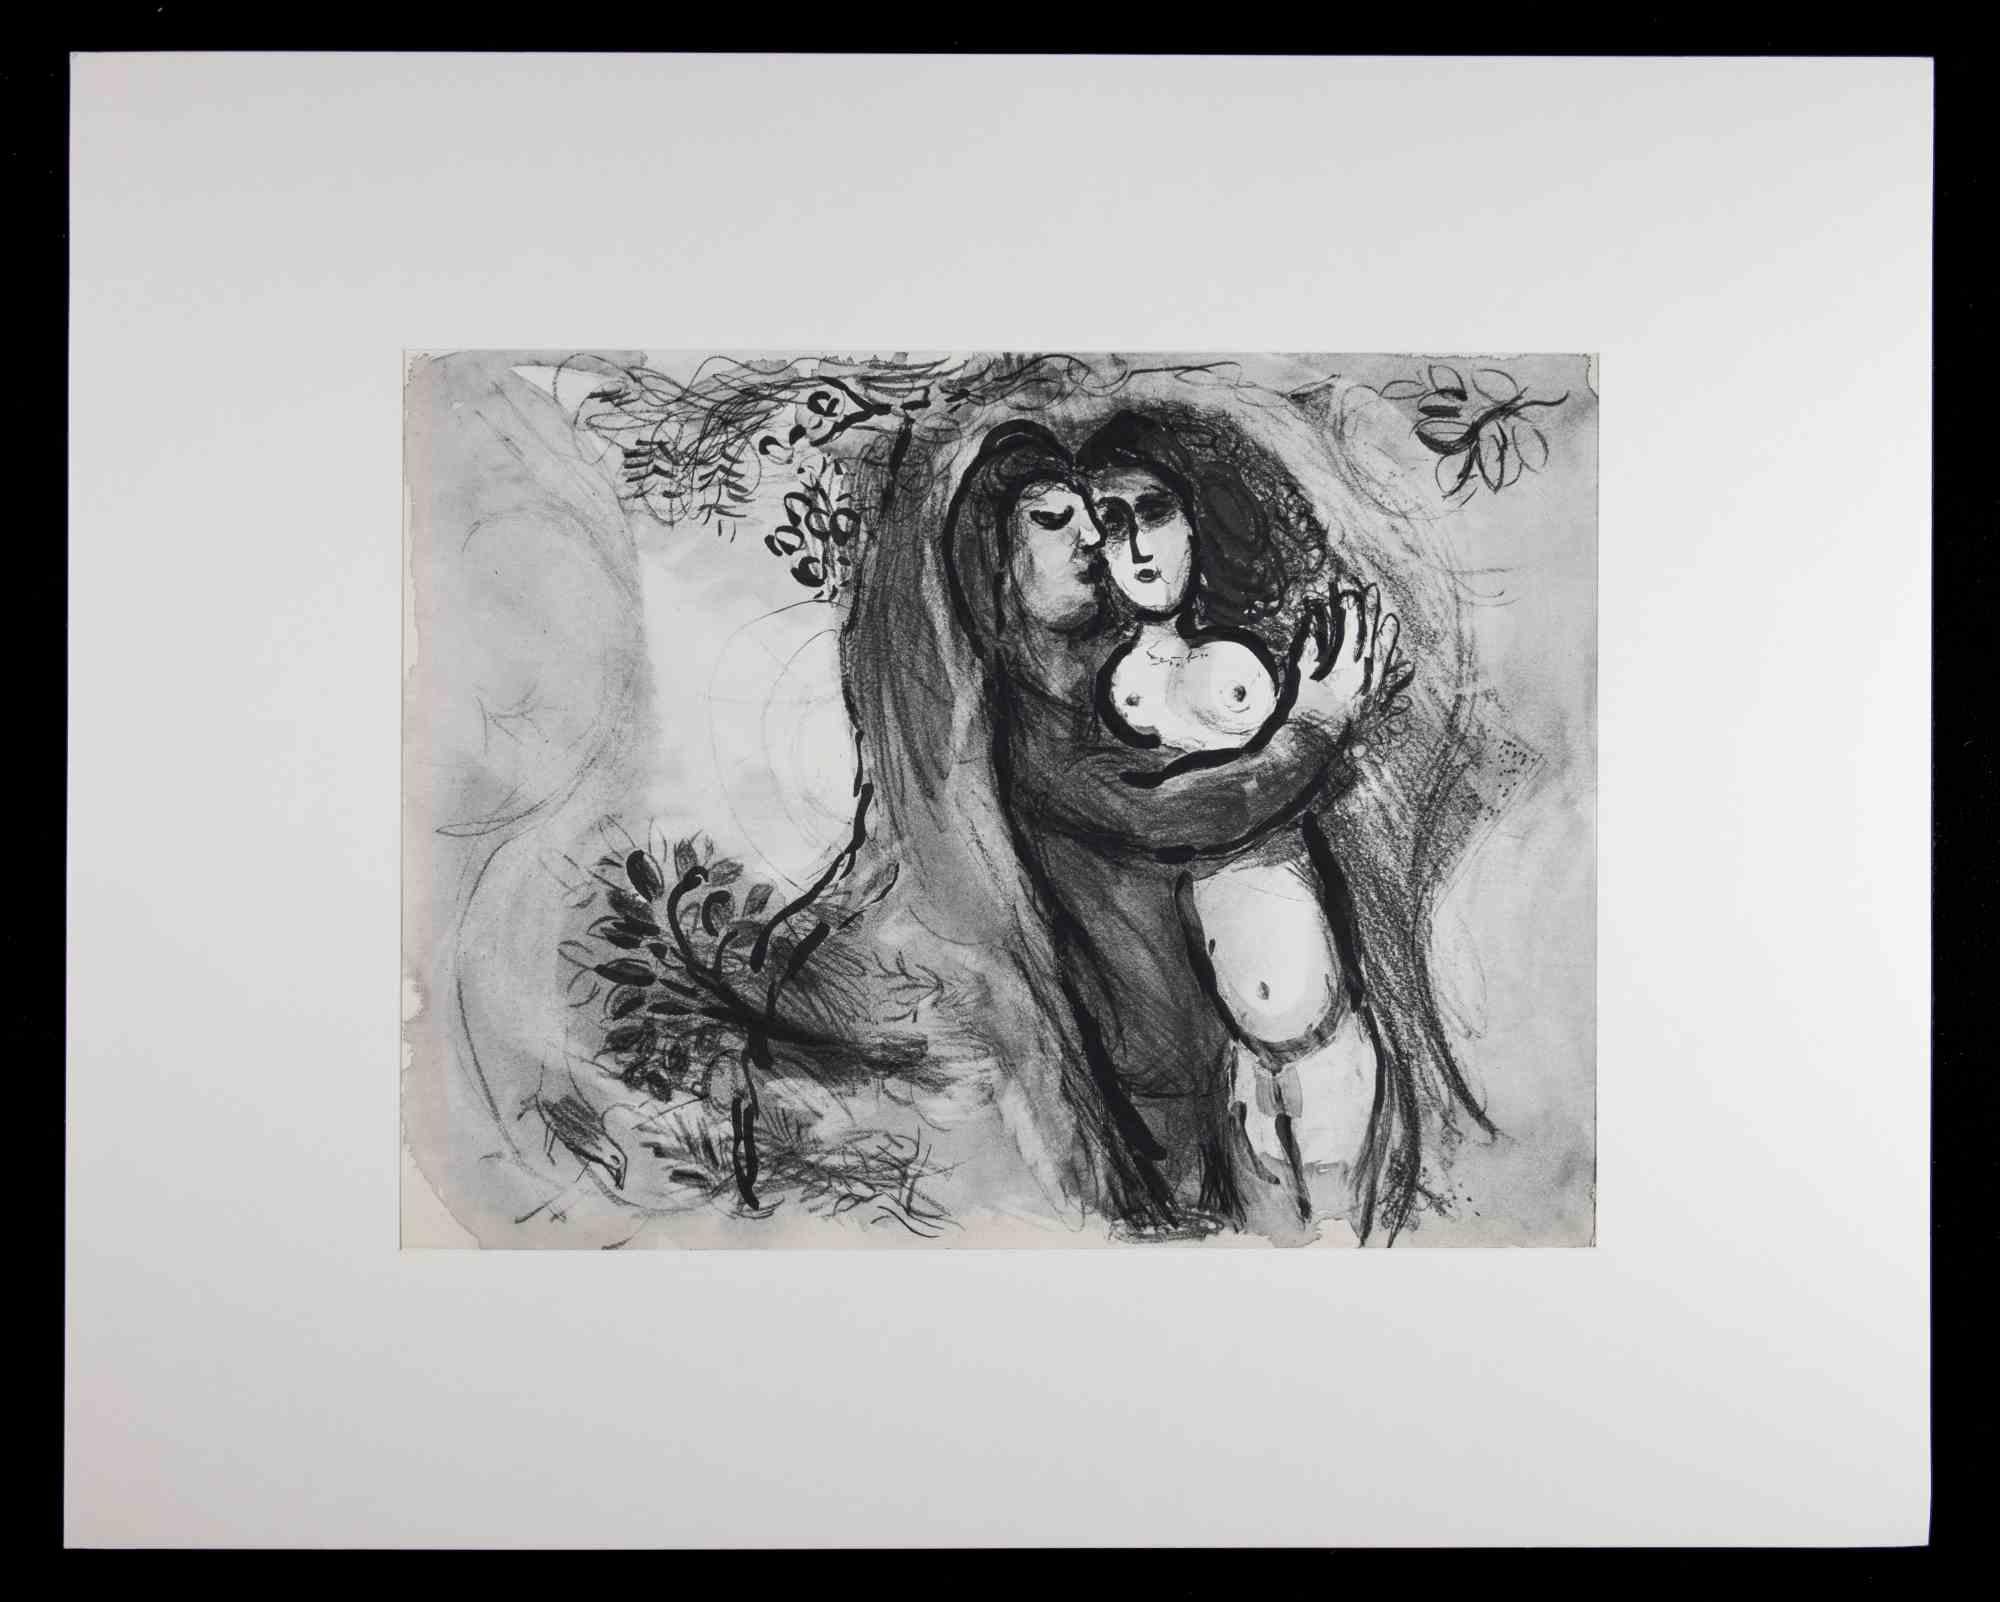 Sichem enlève Dinas  from Verve "Dessins pour la bible" is a splendid heliogravure realized by Marc Chagall in 1960s.

This beautiful artwork belongs to the issue of Verve that includes the artworks that Marc Chagall made in 1958 and 1959 on